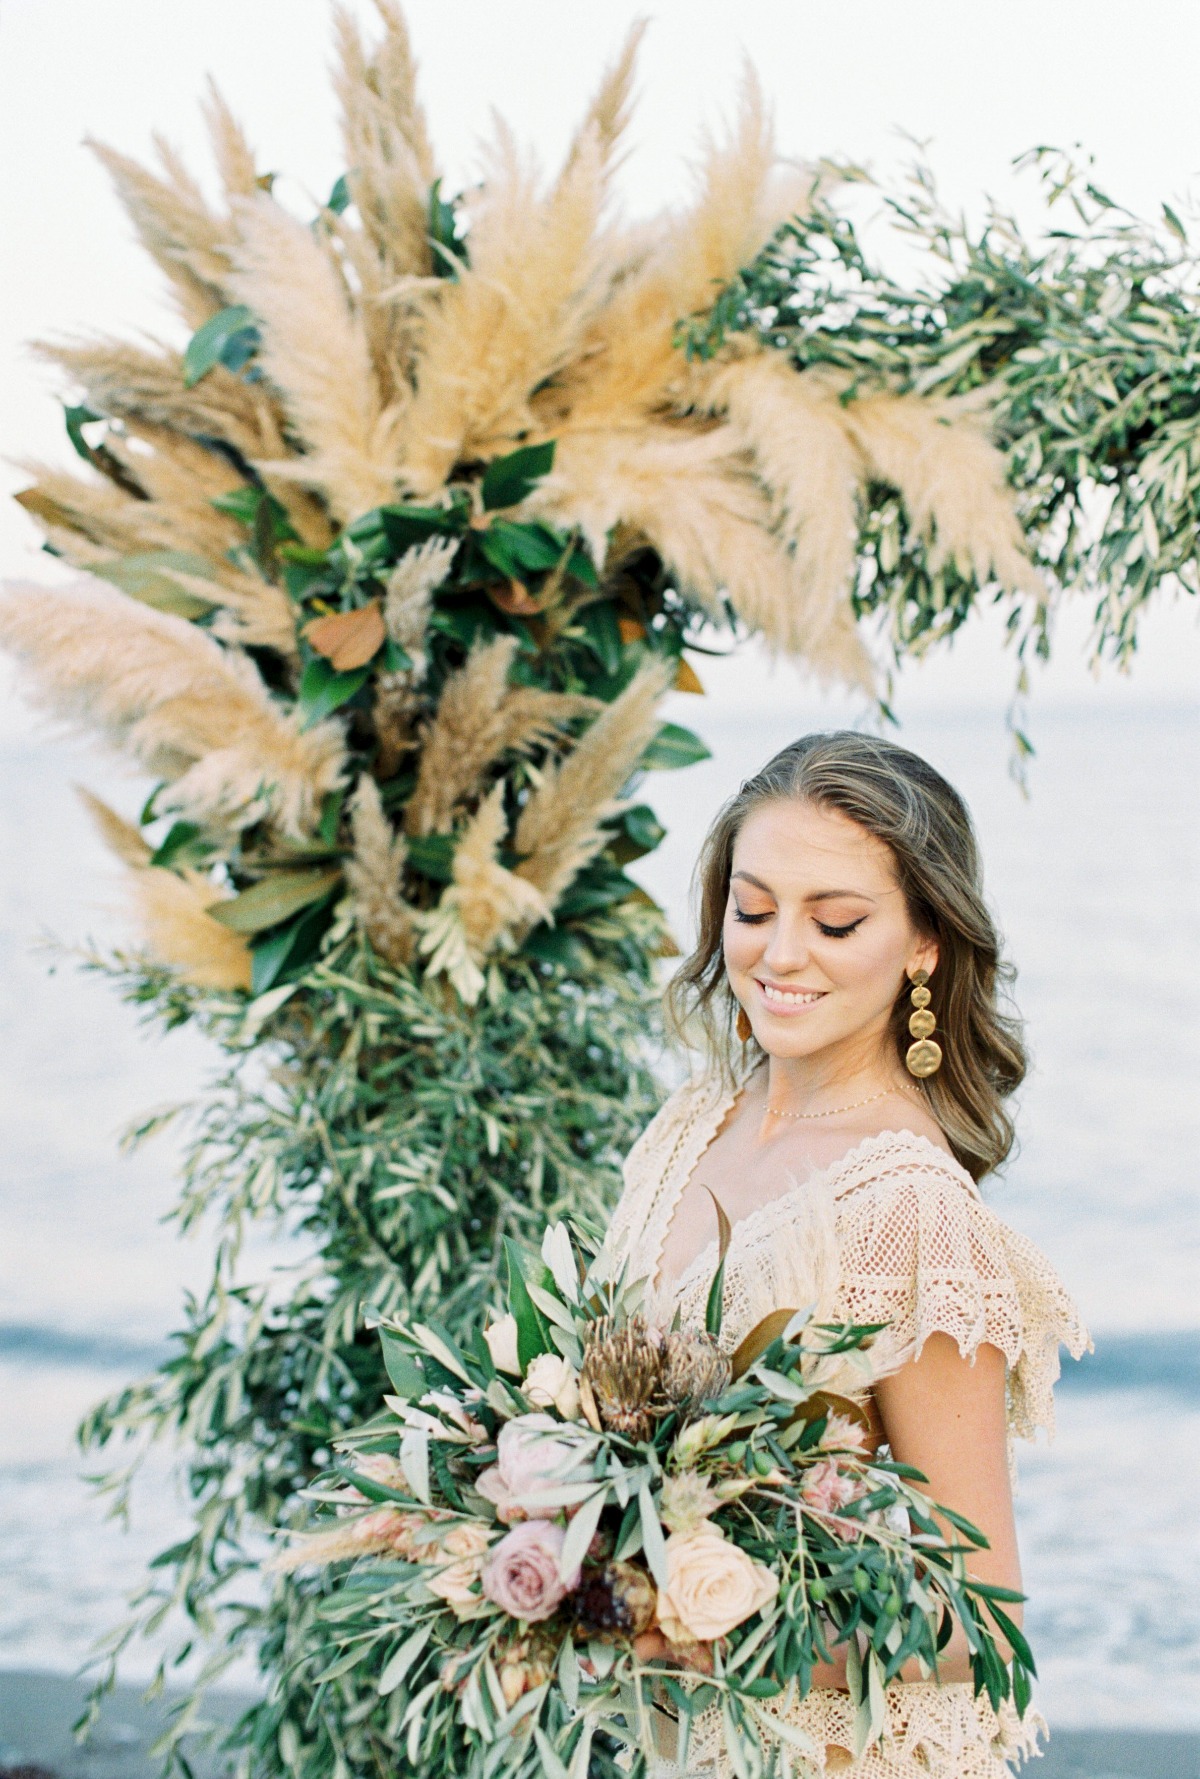 The Most Chic Beachy Wedding Day For Your Boho Heartt